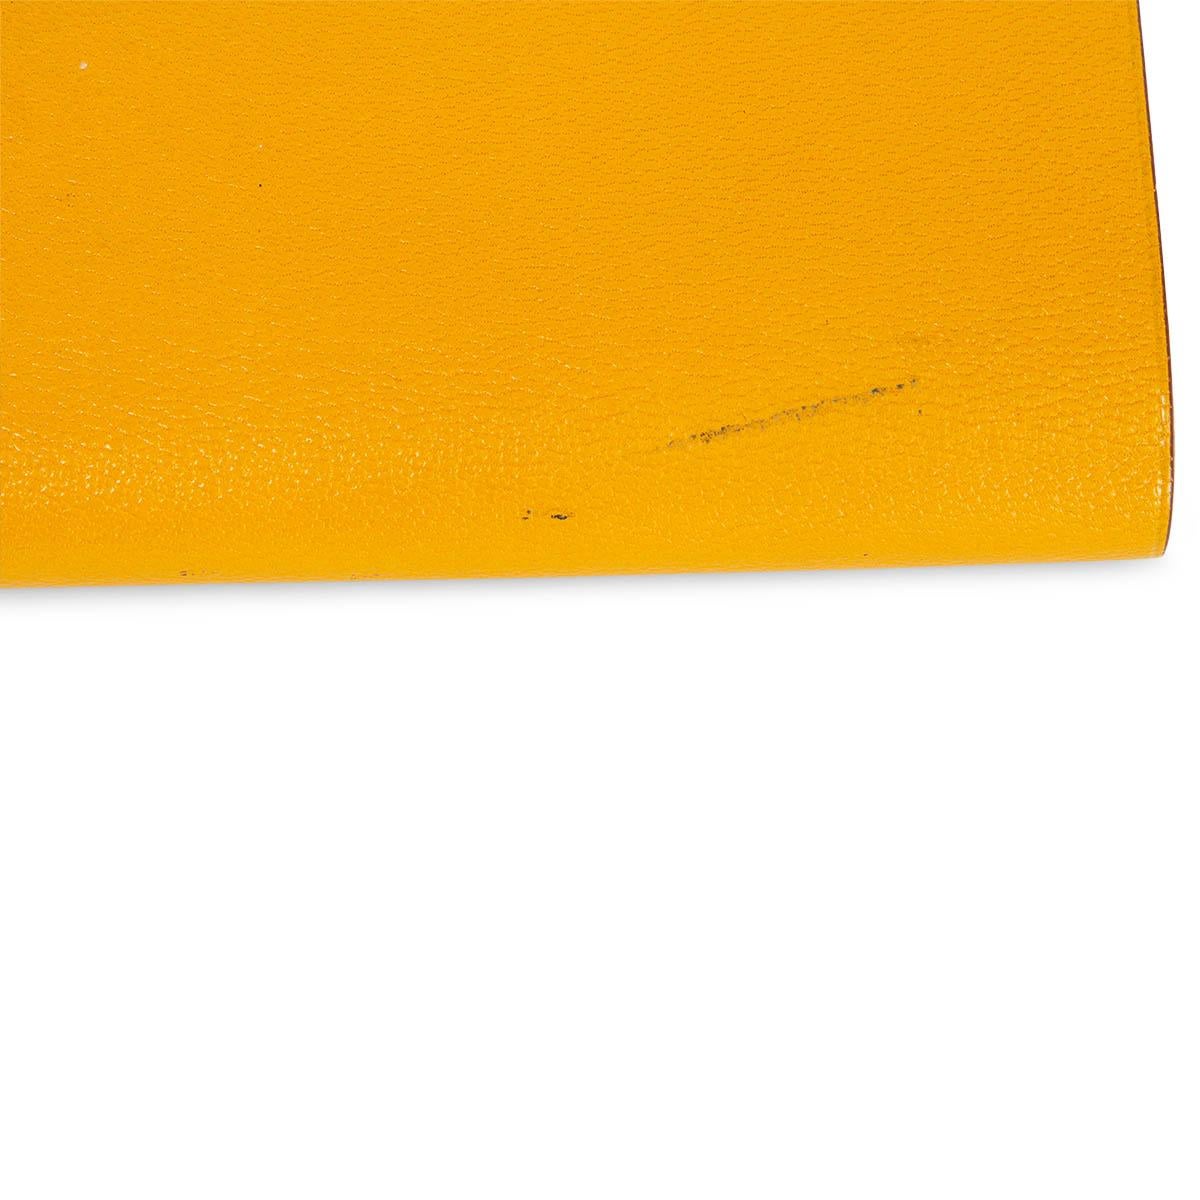 HERMES Jaune yellow Mysore leather CAHIER ROULE Roll Notebook For Sale 3